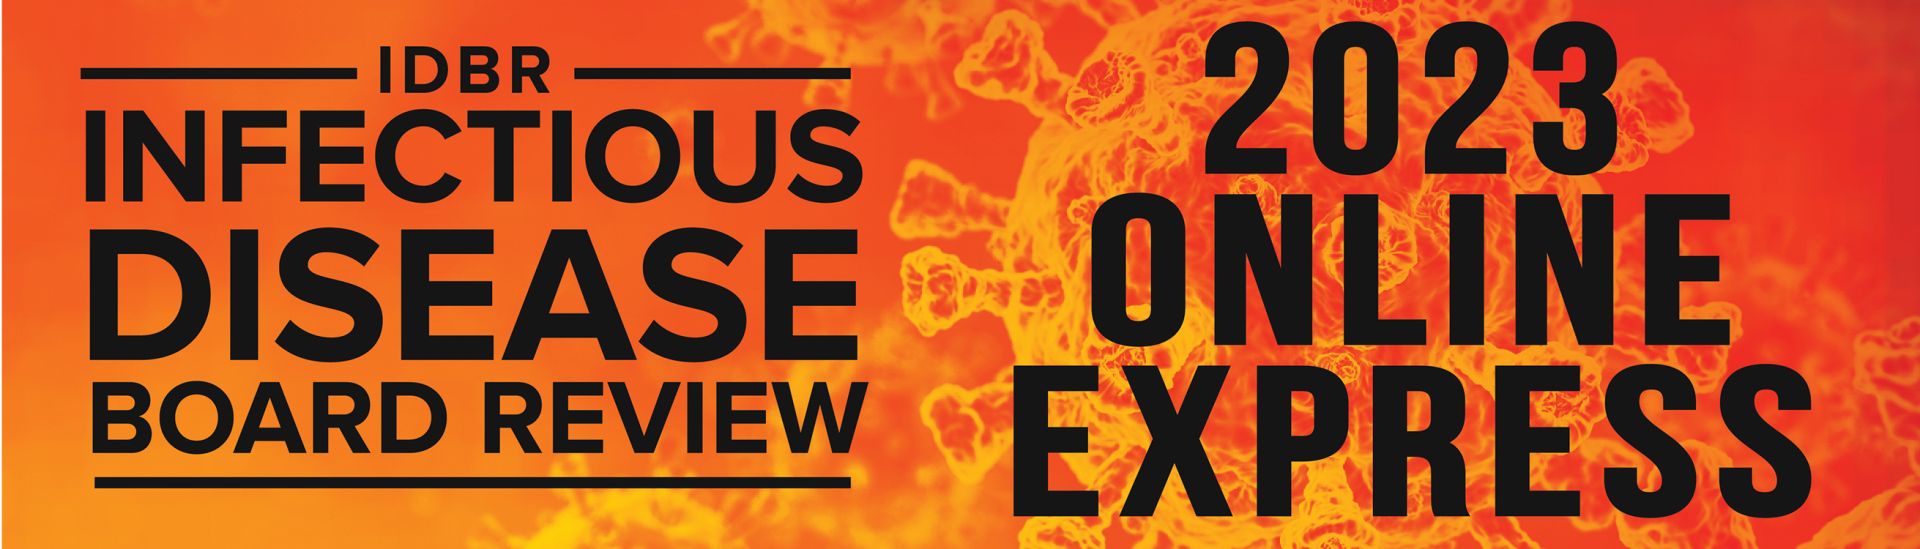 Infectious Disease Board Review 2023 ONLINE EXPRESS